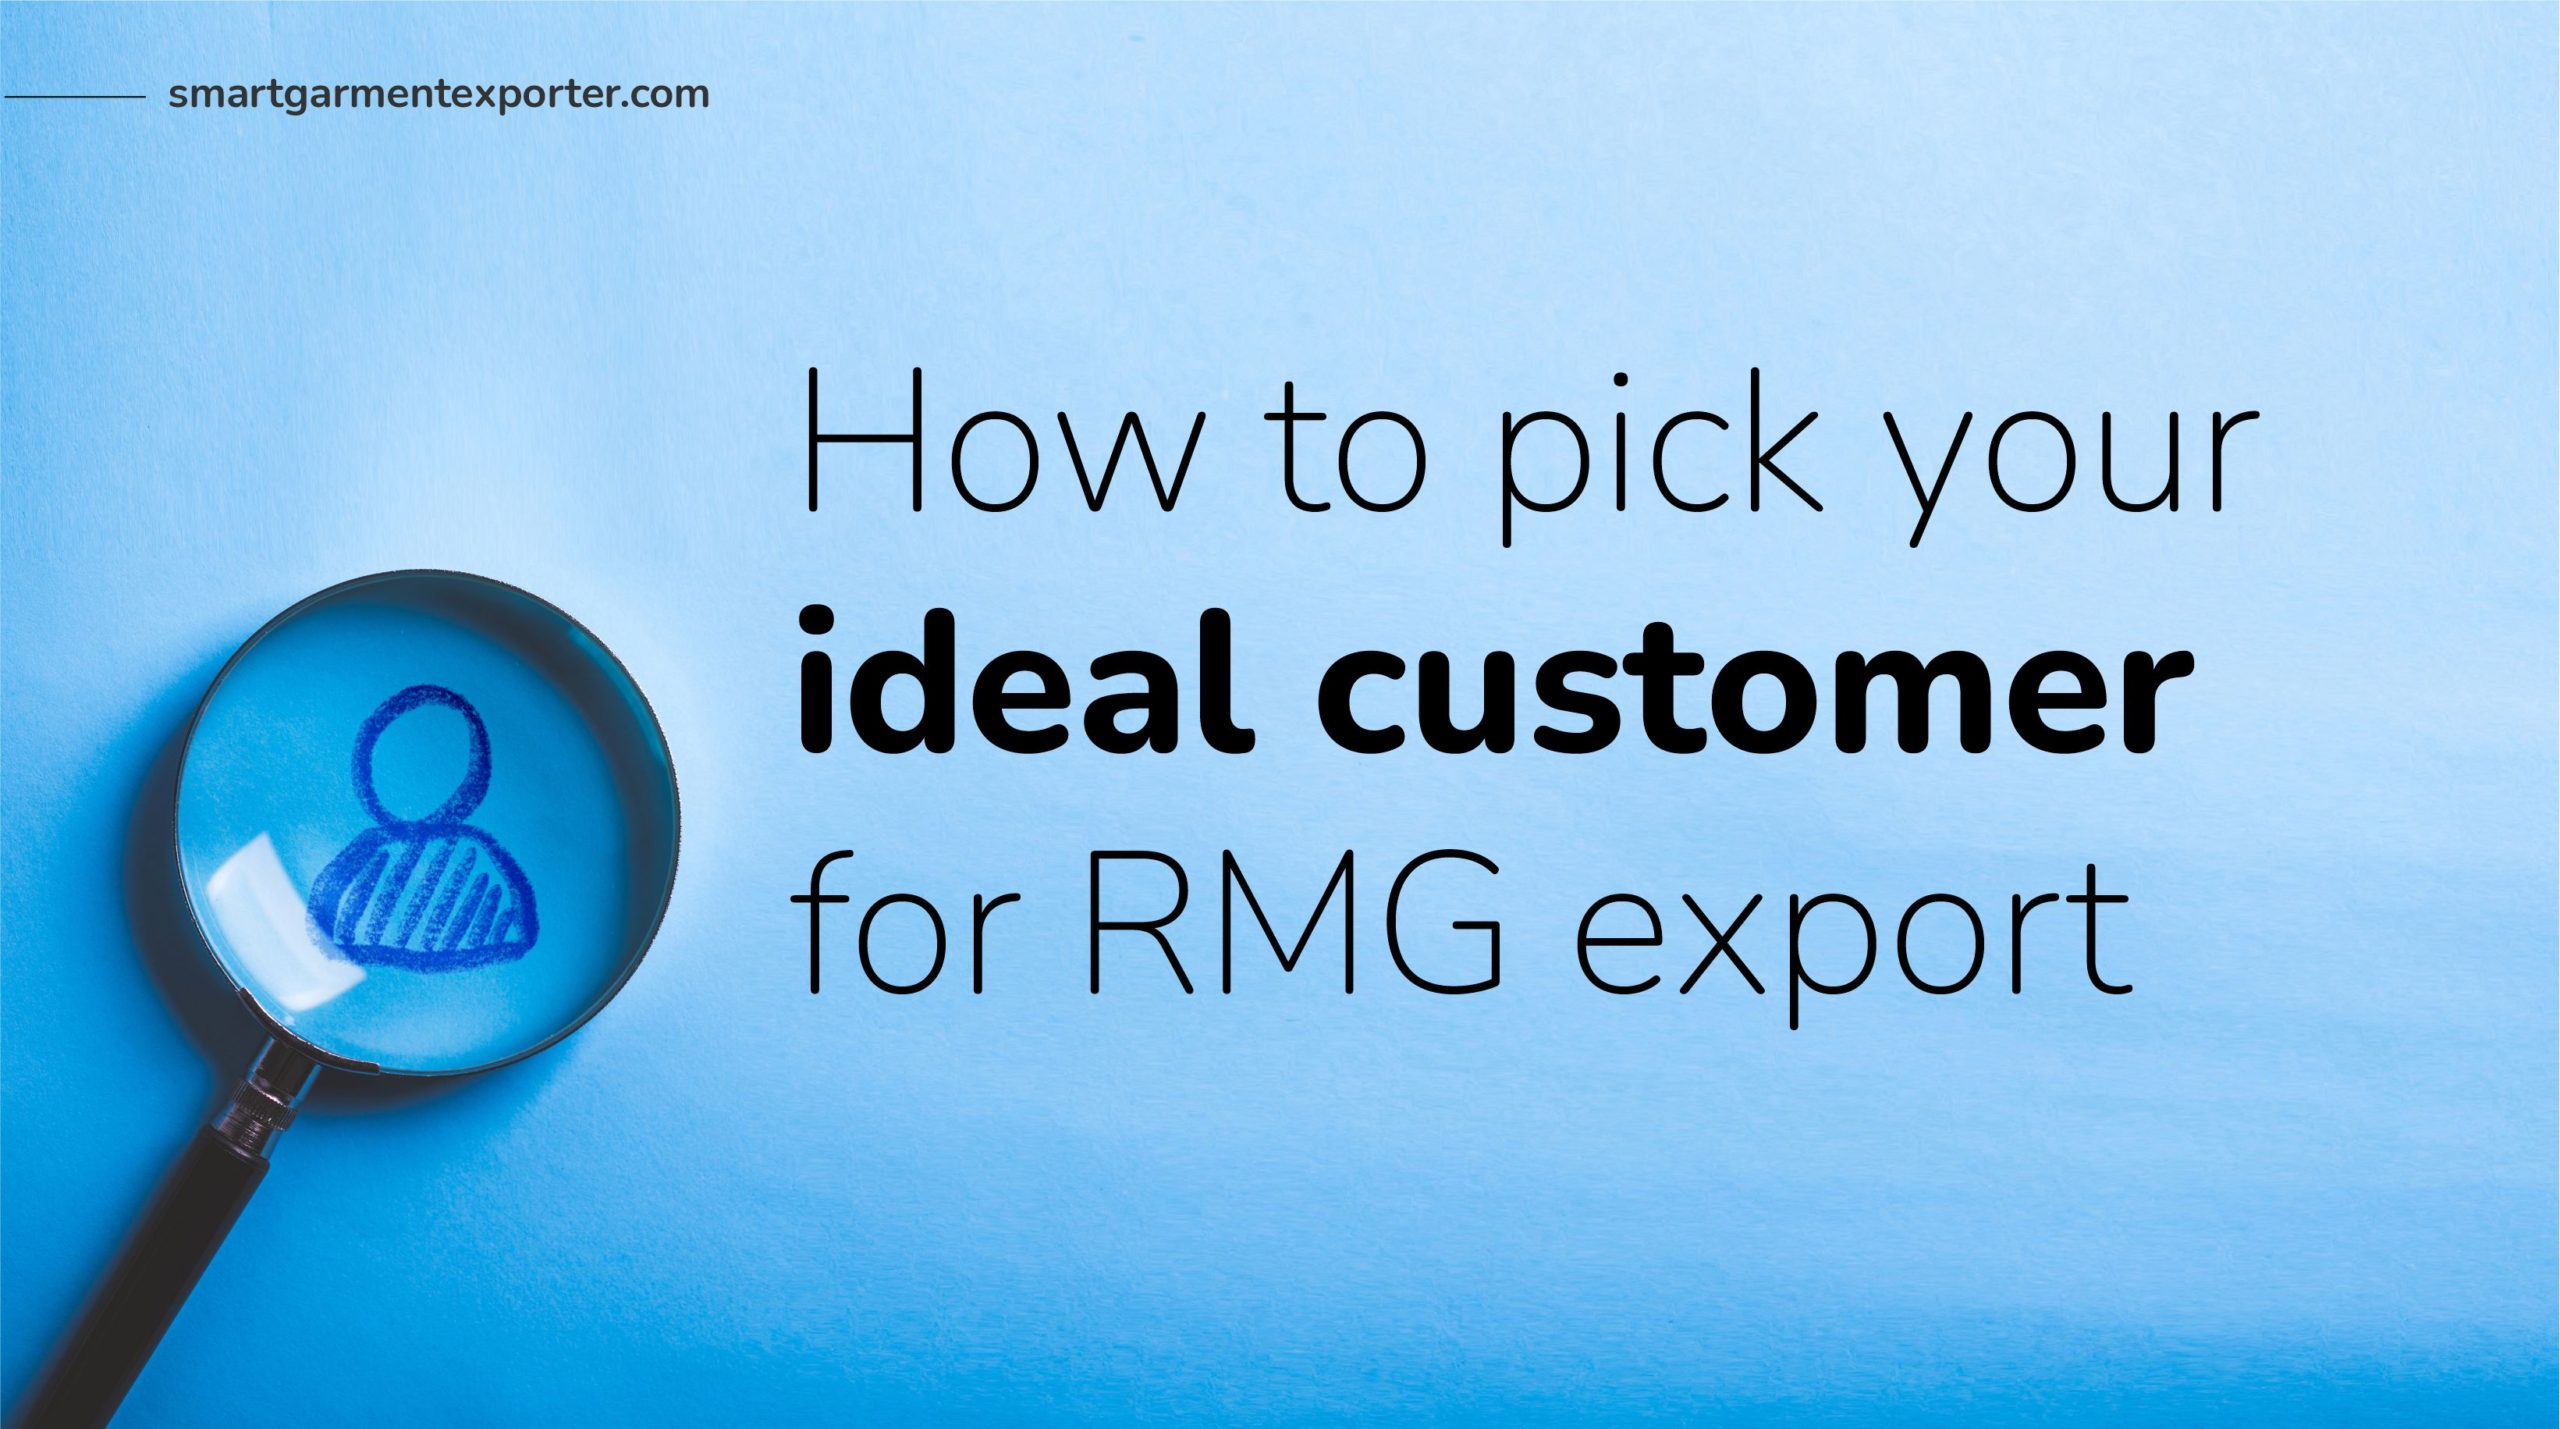 How to pick your ideal customer for RMG export